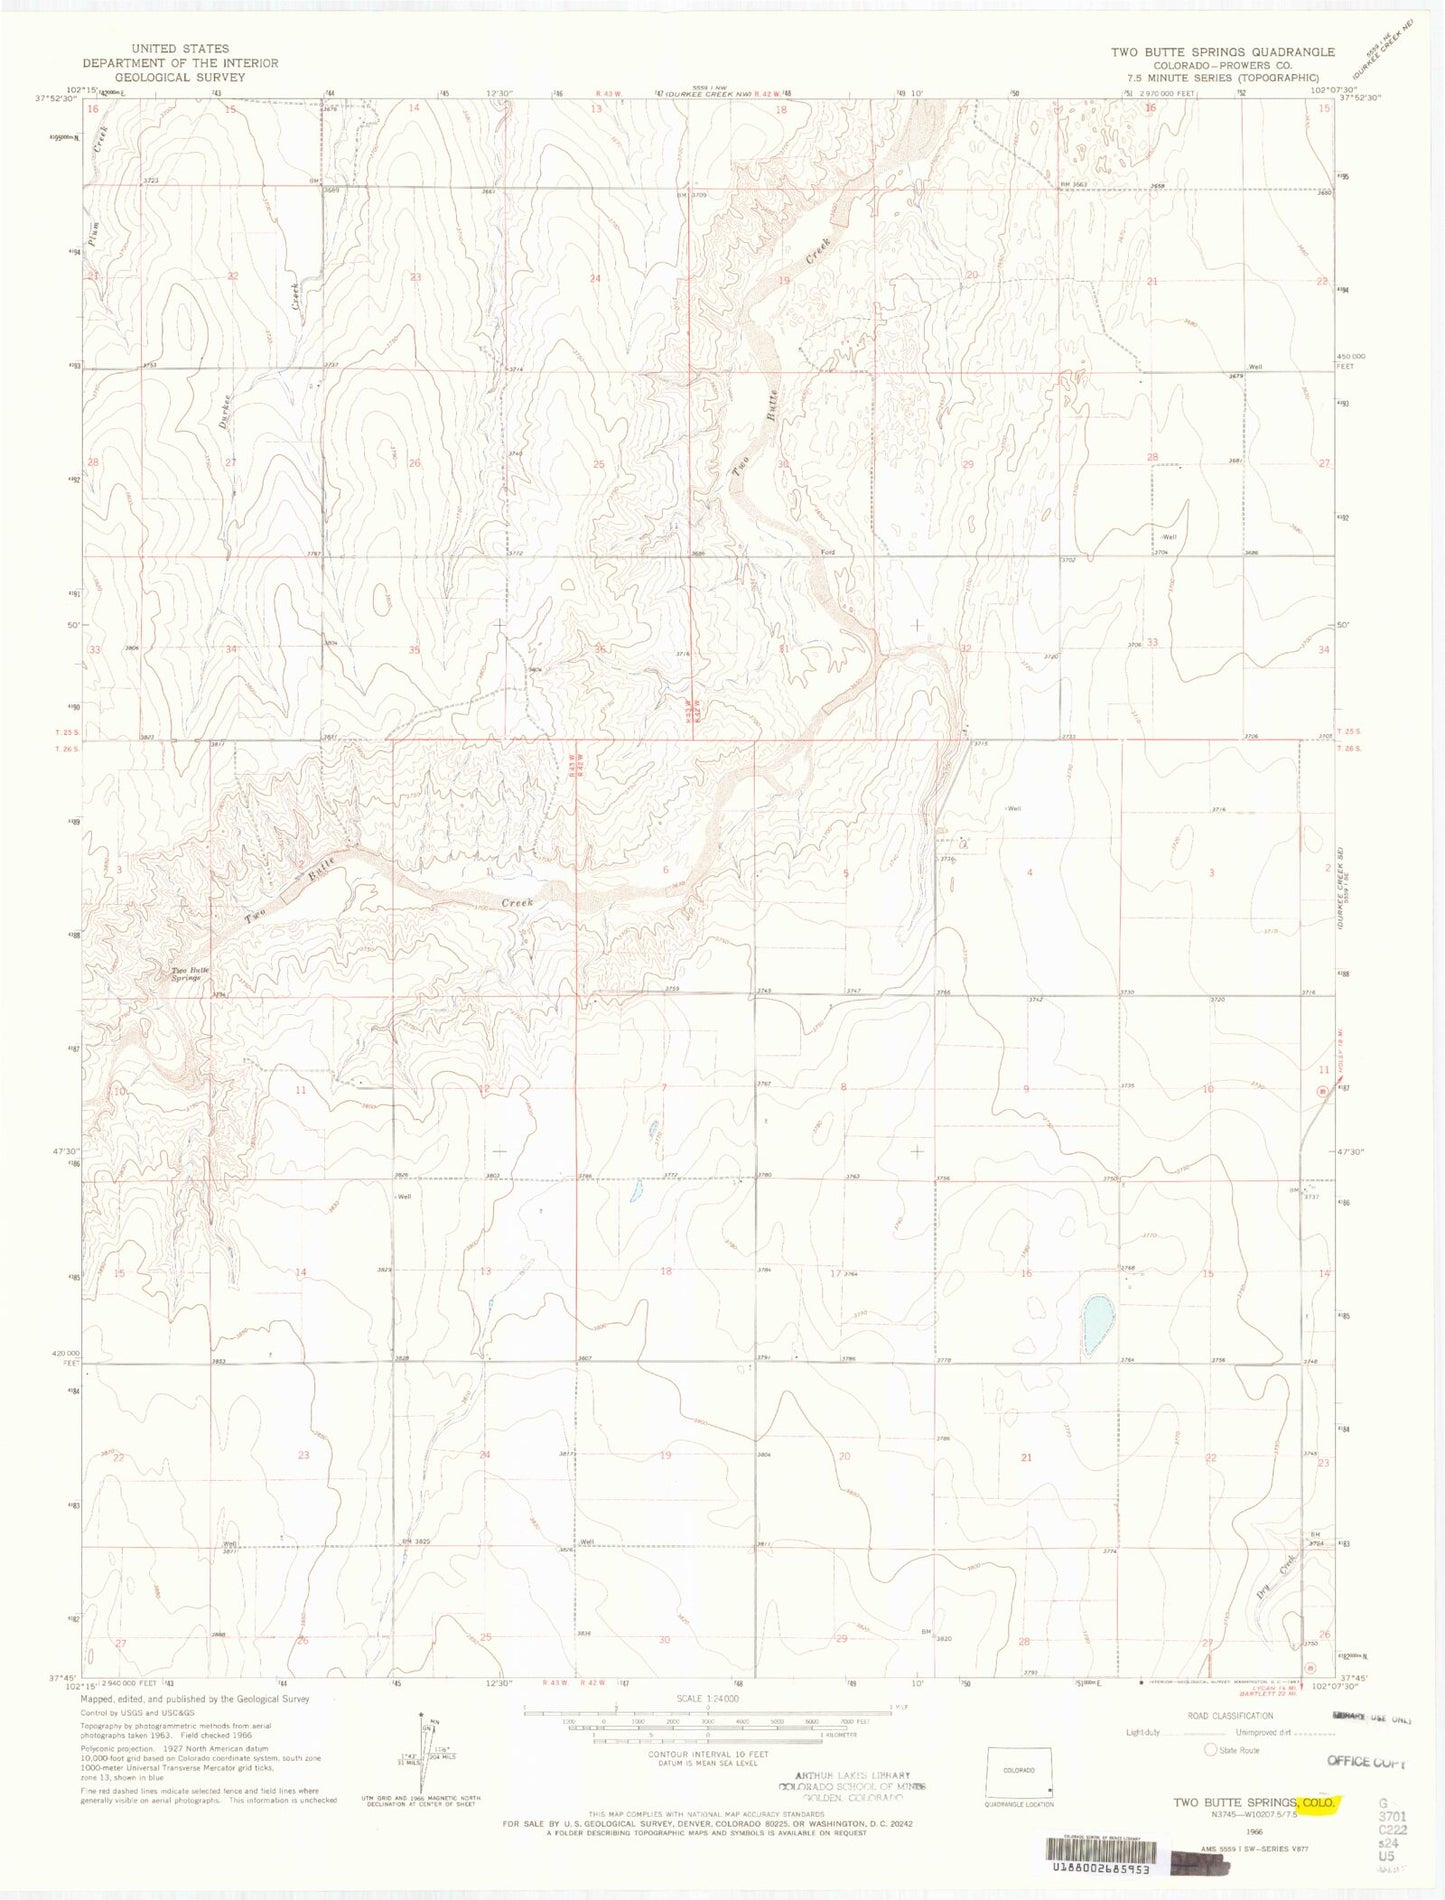 Classic USGS Two Butte Springs Colorado 7.5'x7.5' Topo Map Image